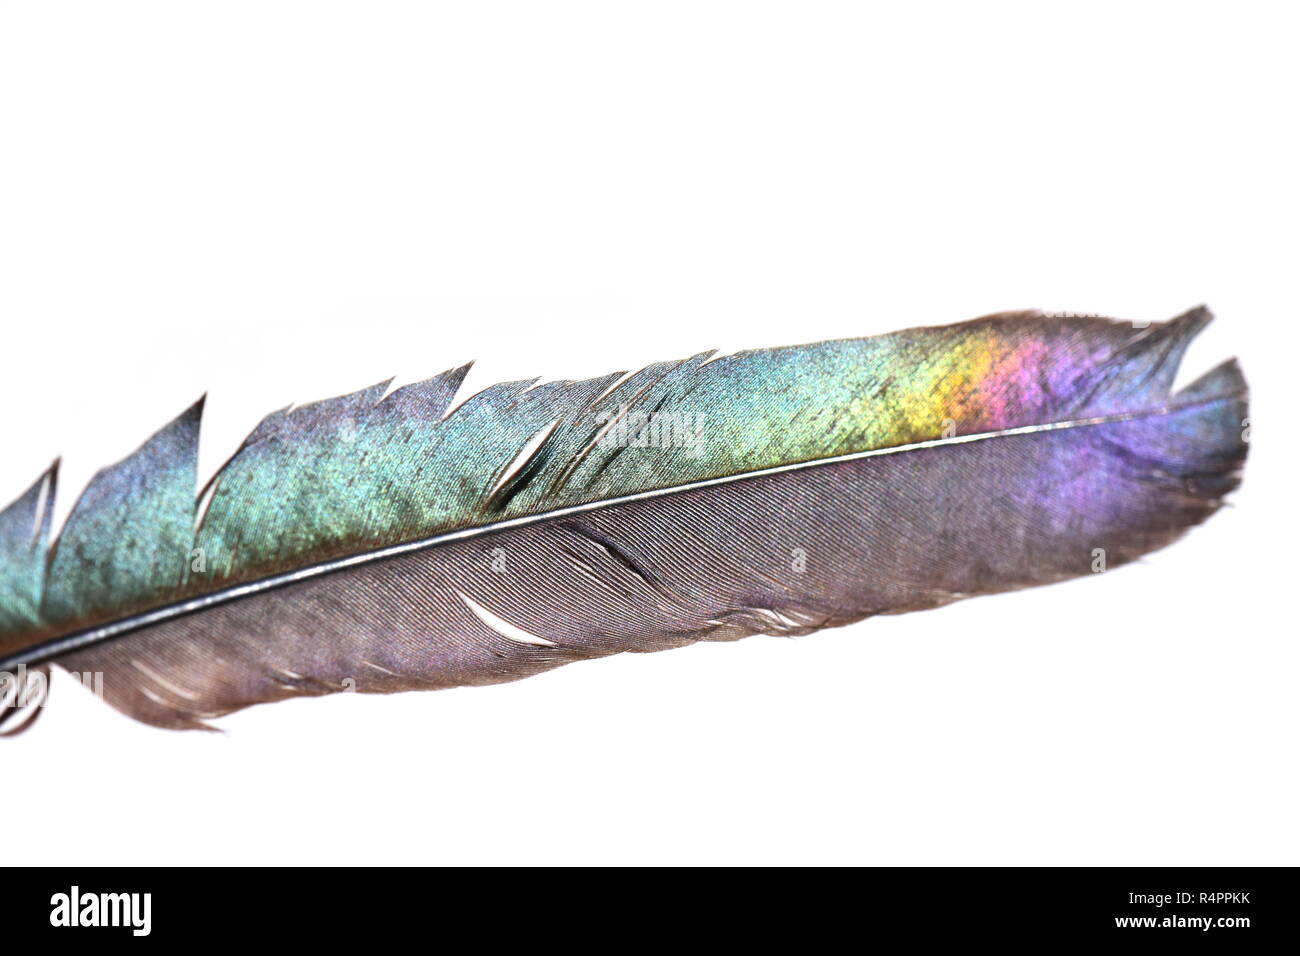 Shiny colorful feather from magpie bird isolated on white background Stock Photo